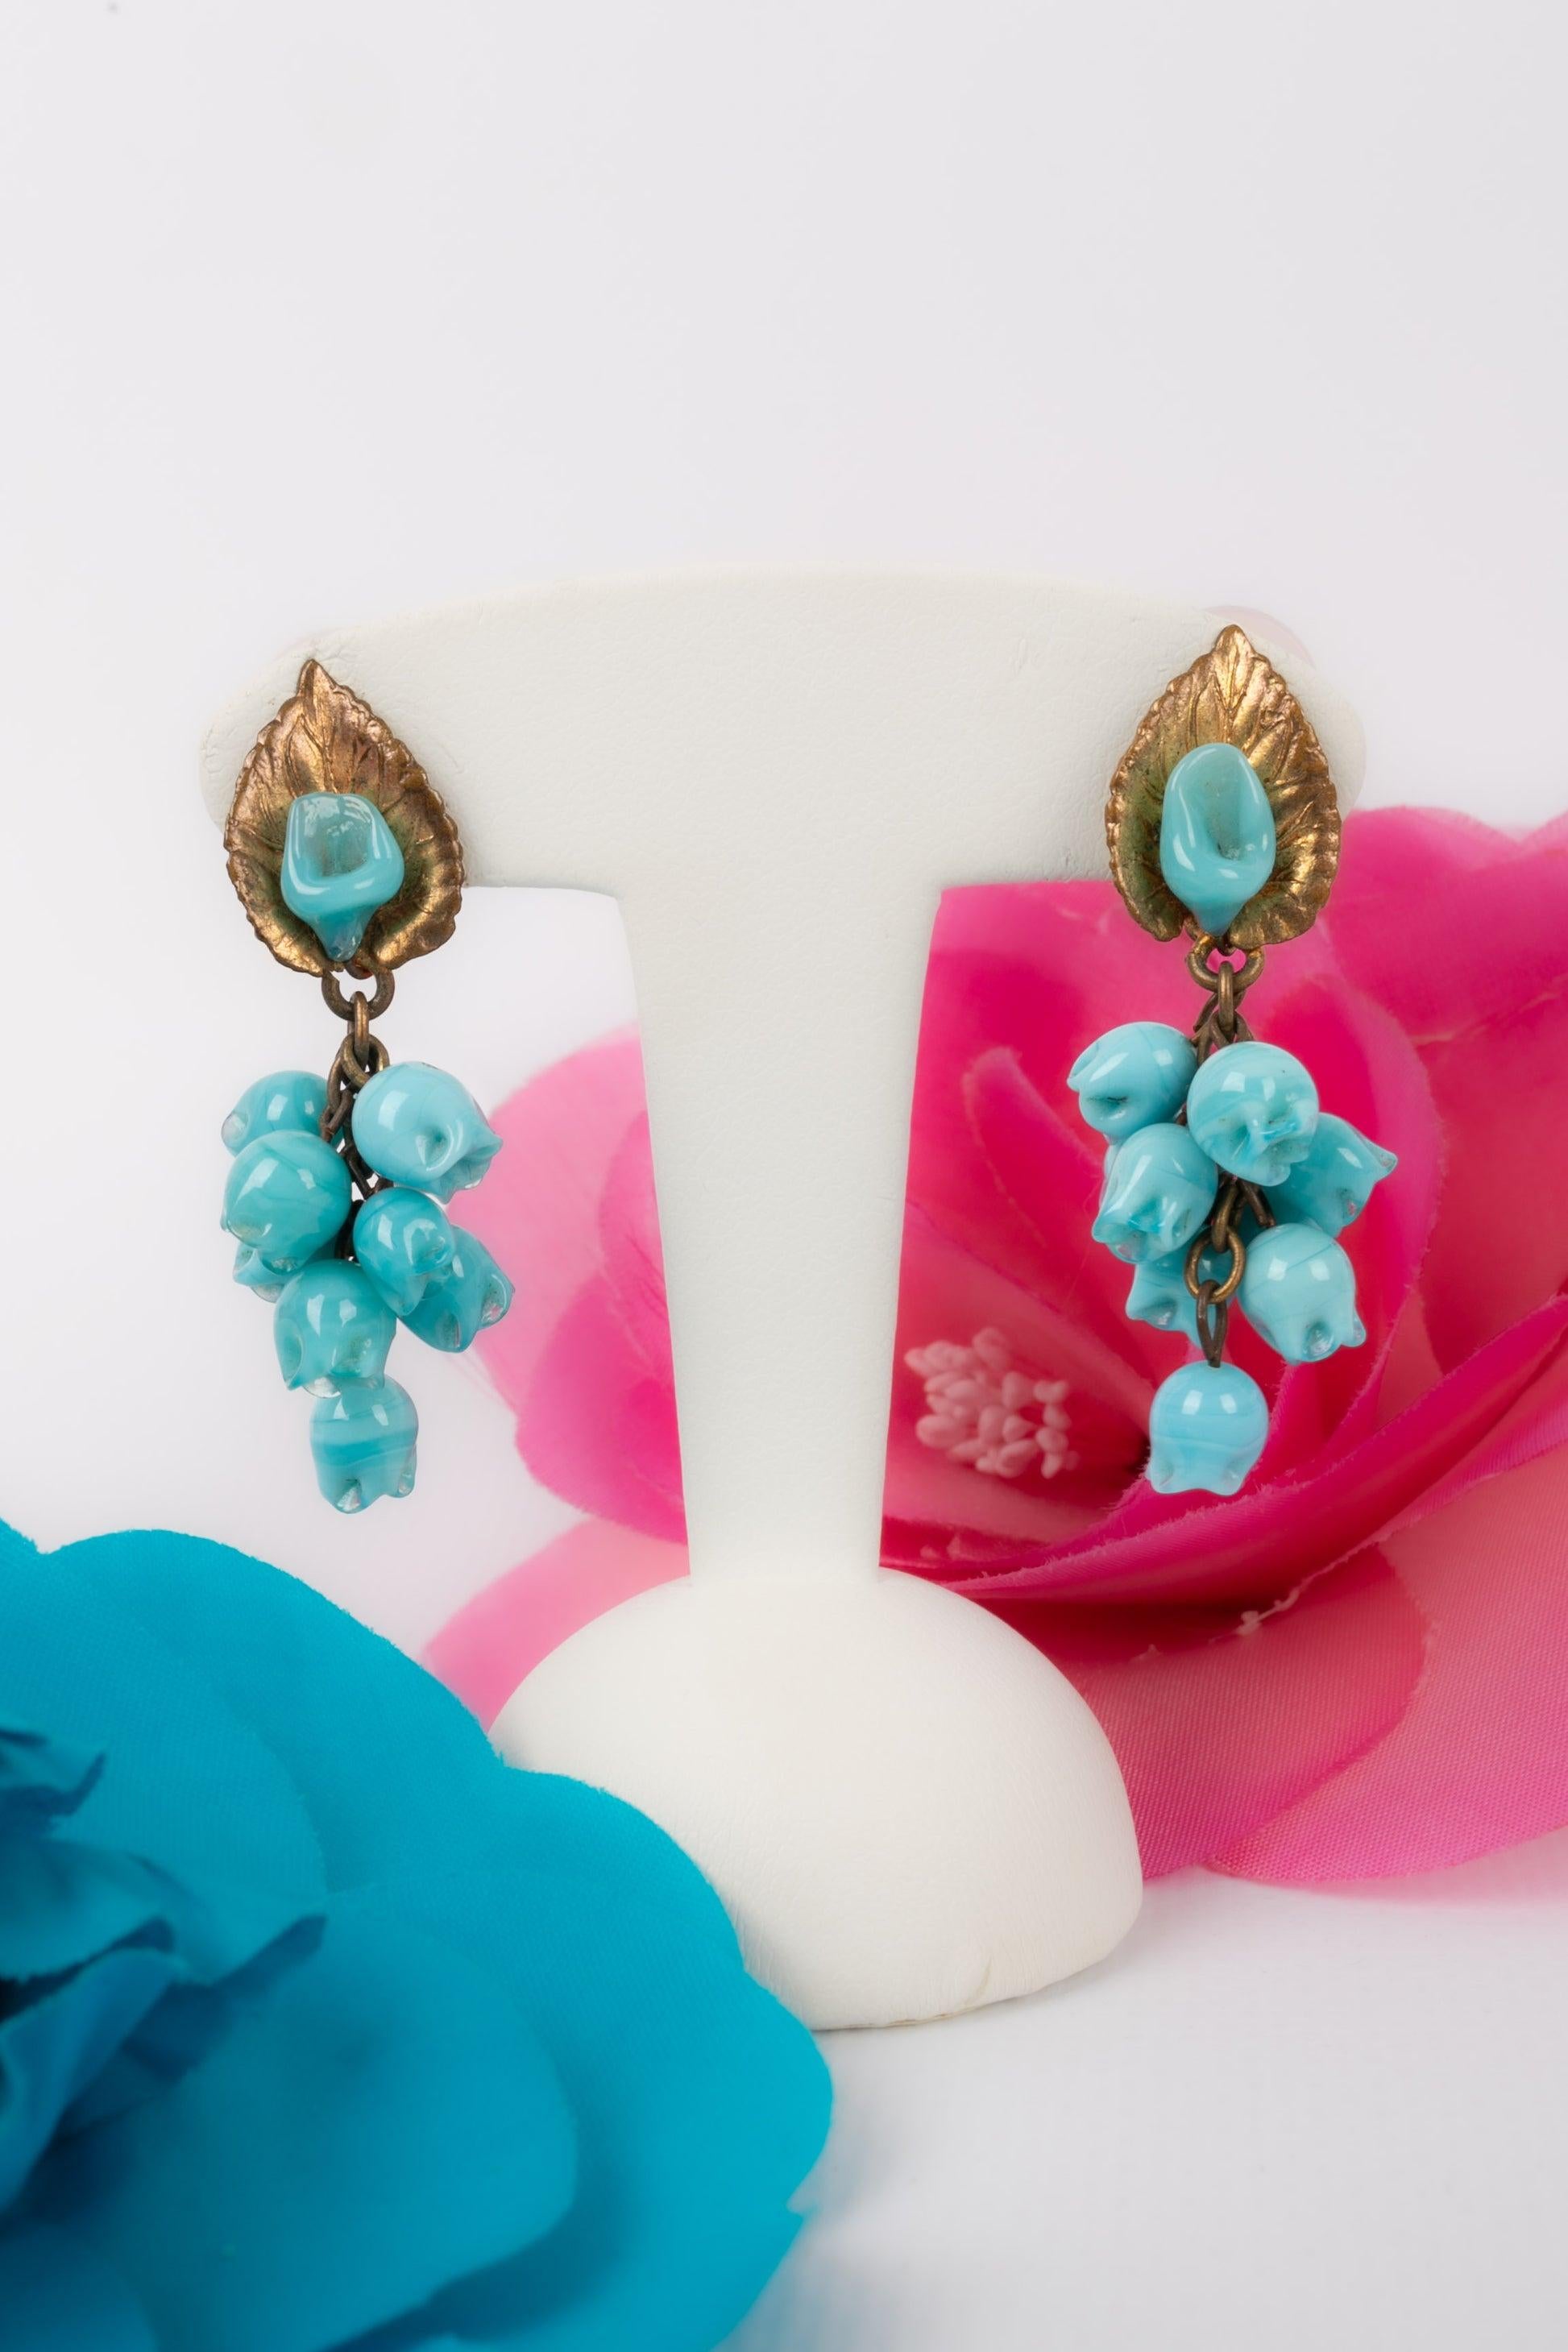 Maison Rousselet Golden Metal Earrings with Blue Glass Paste For Sale 2